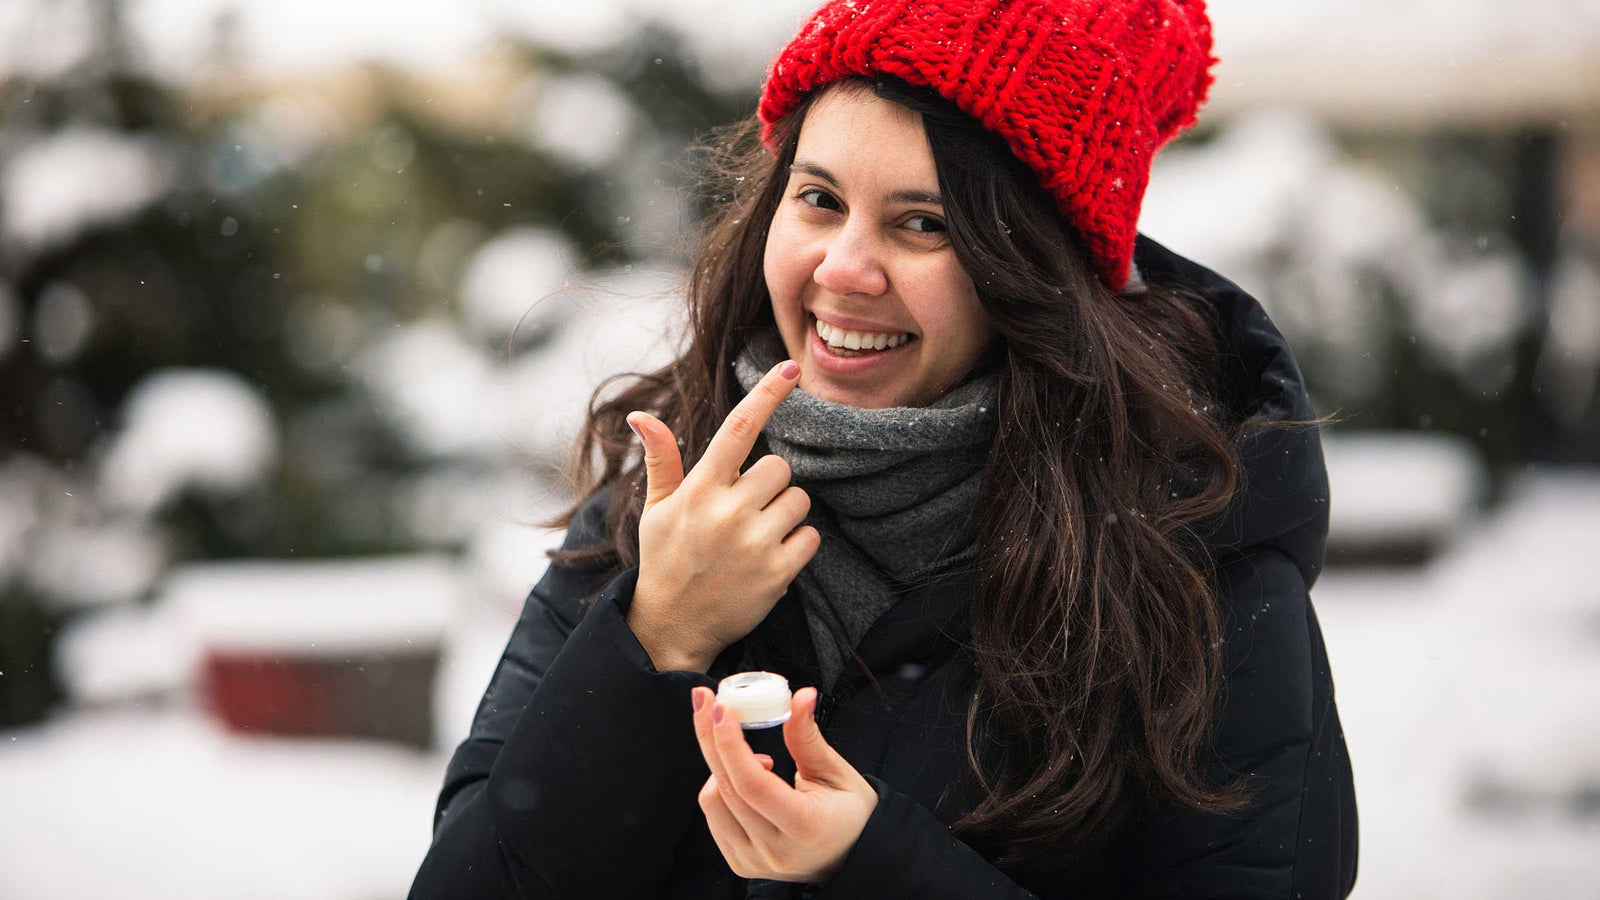 Top 5 Essential Oil Recipes for Winter Skin Care